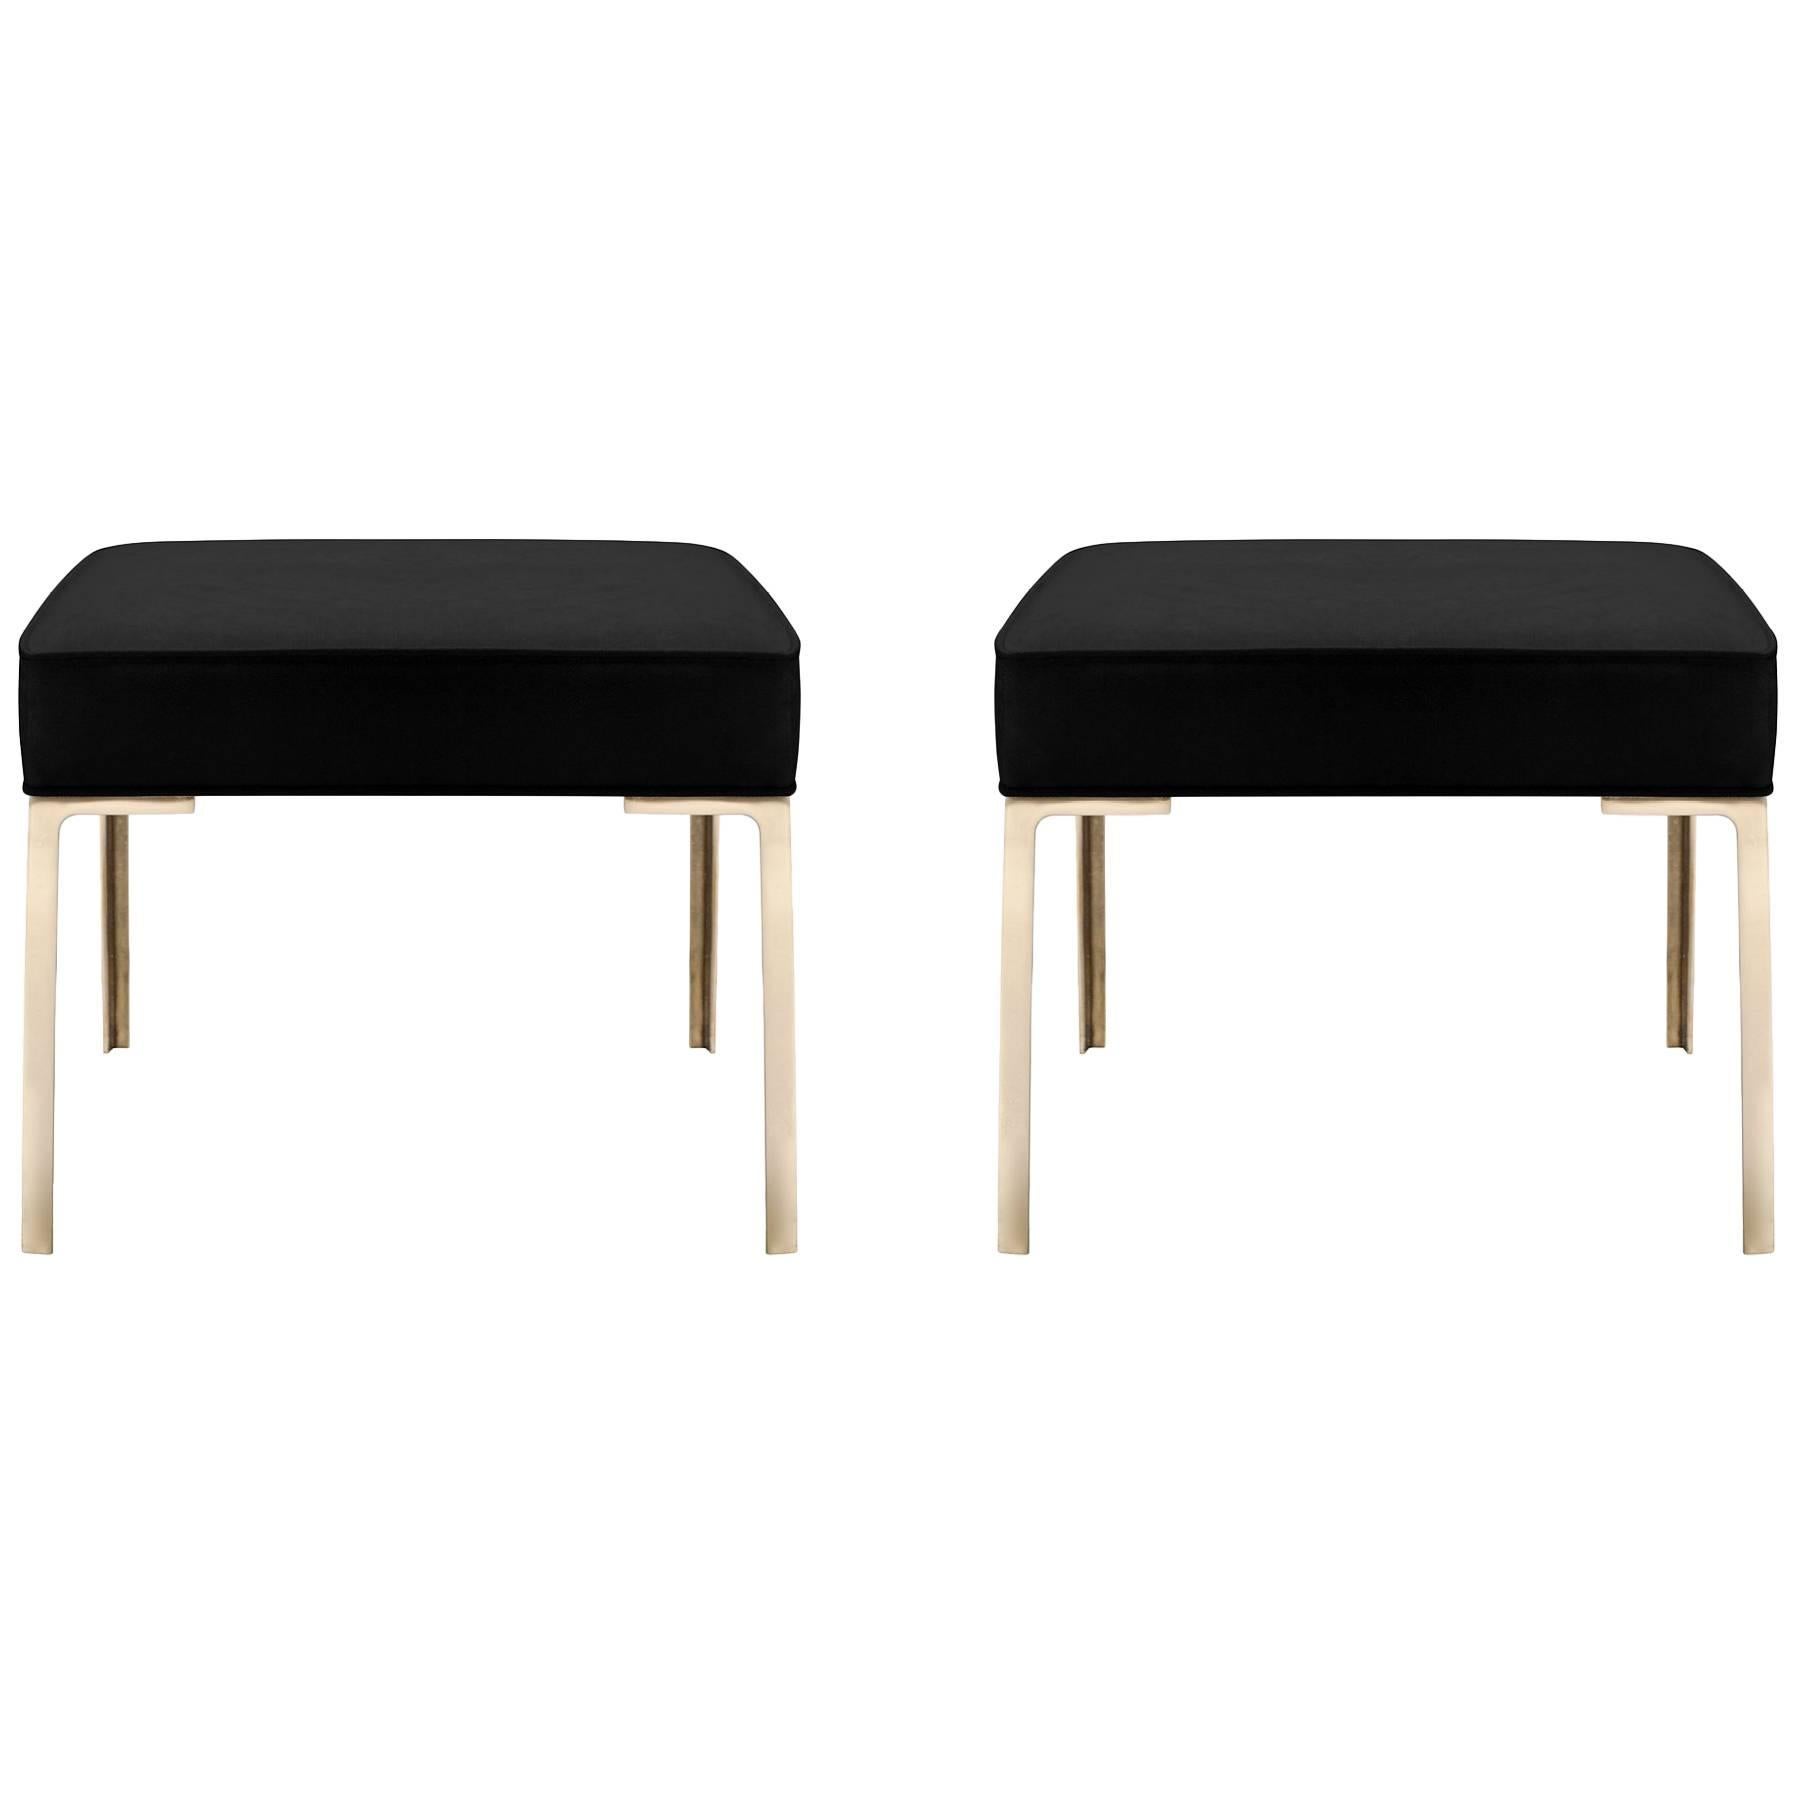 Astor Brass Ottomans in Noir Luxe-Suede by Montage, Pair For Sale